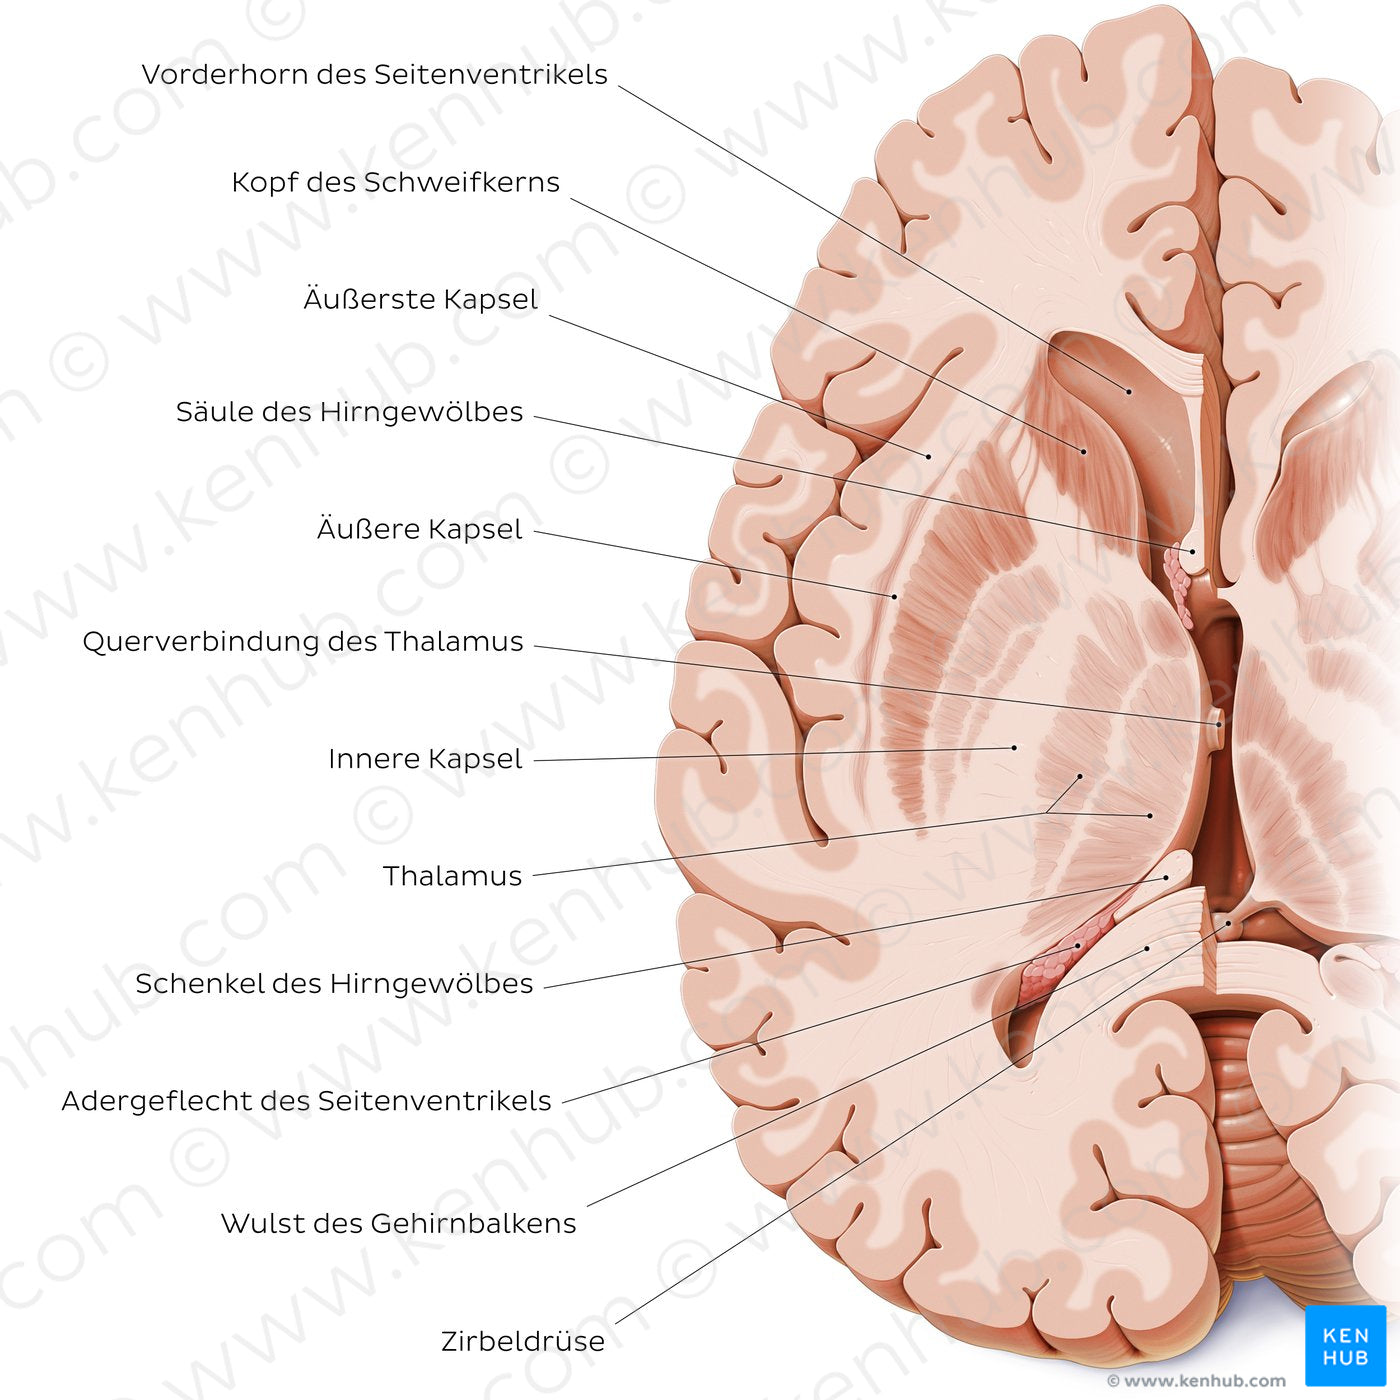 Horizontal section of the brain: Section A (German)